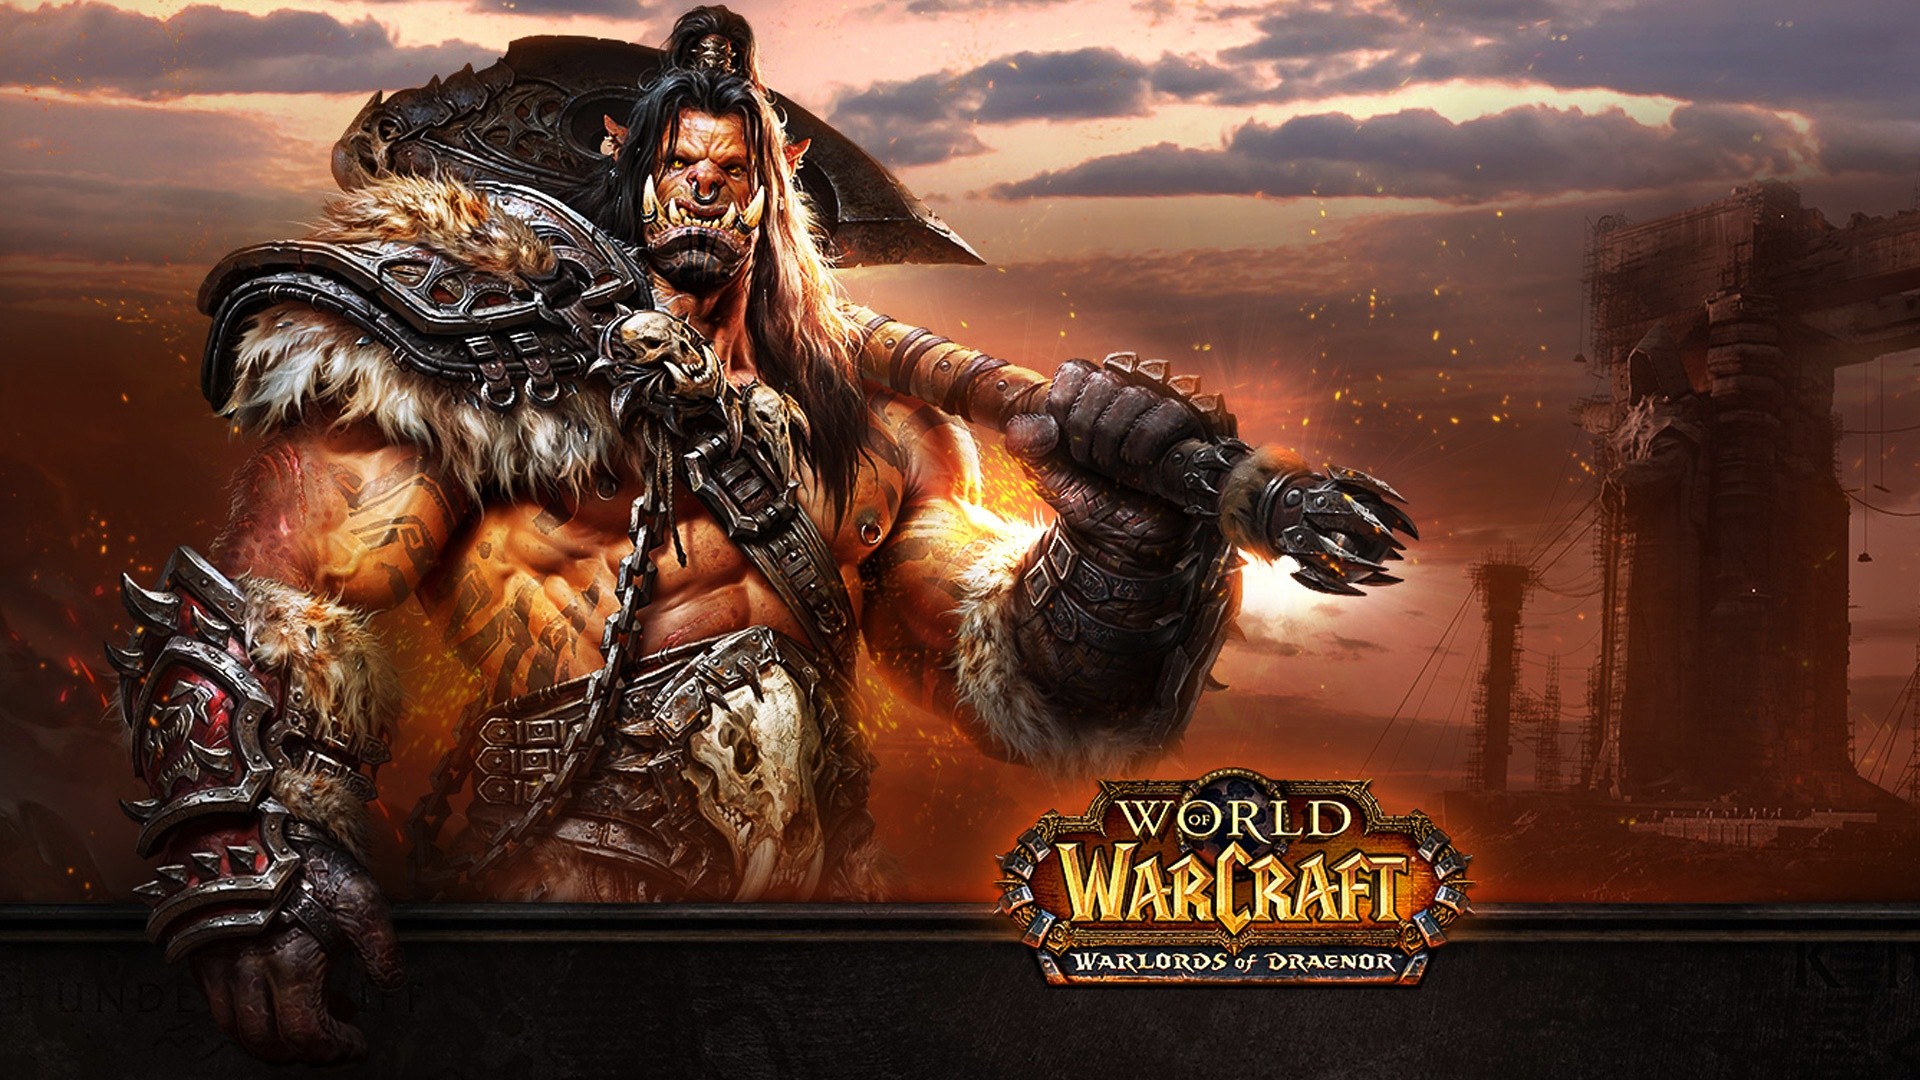 High Resolution Wallpaper | World Of Warcraft: Warlords Of Draenor 1920x1080 px